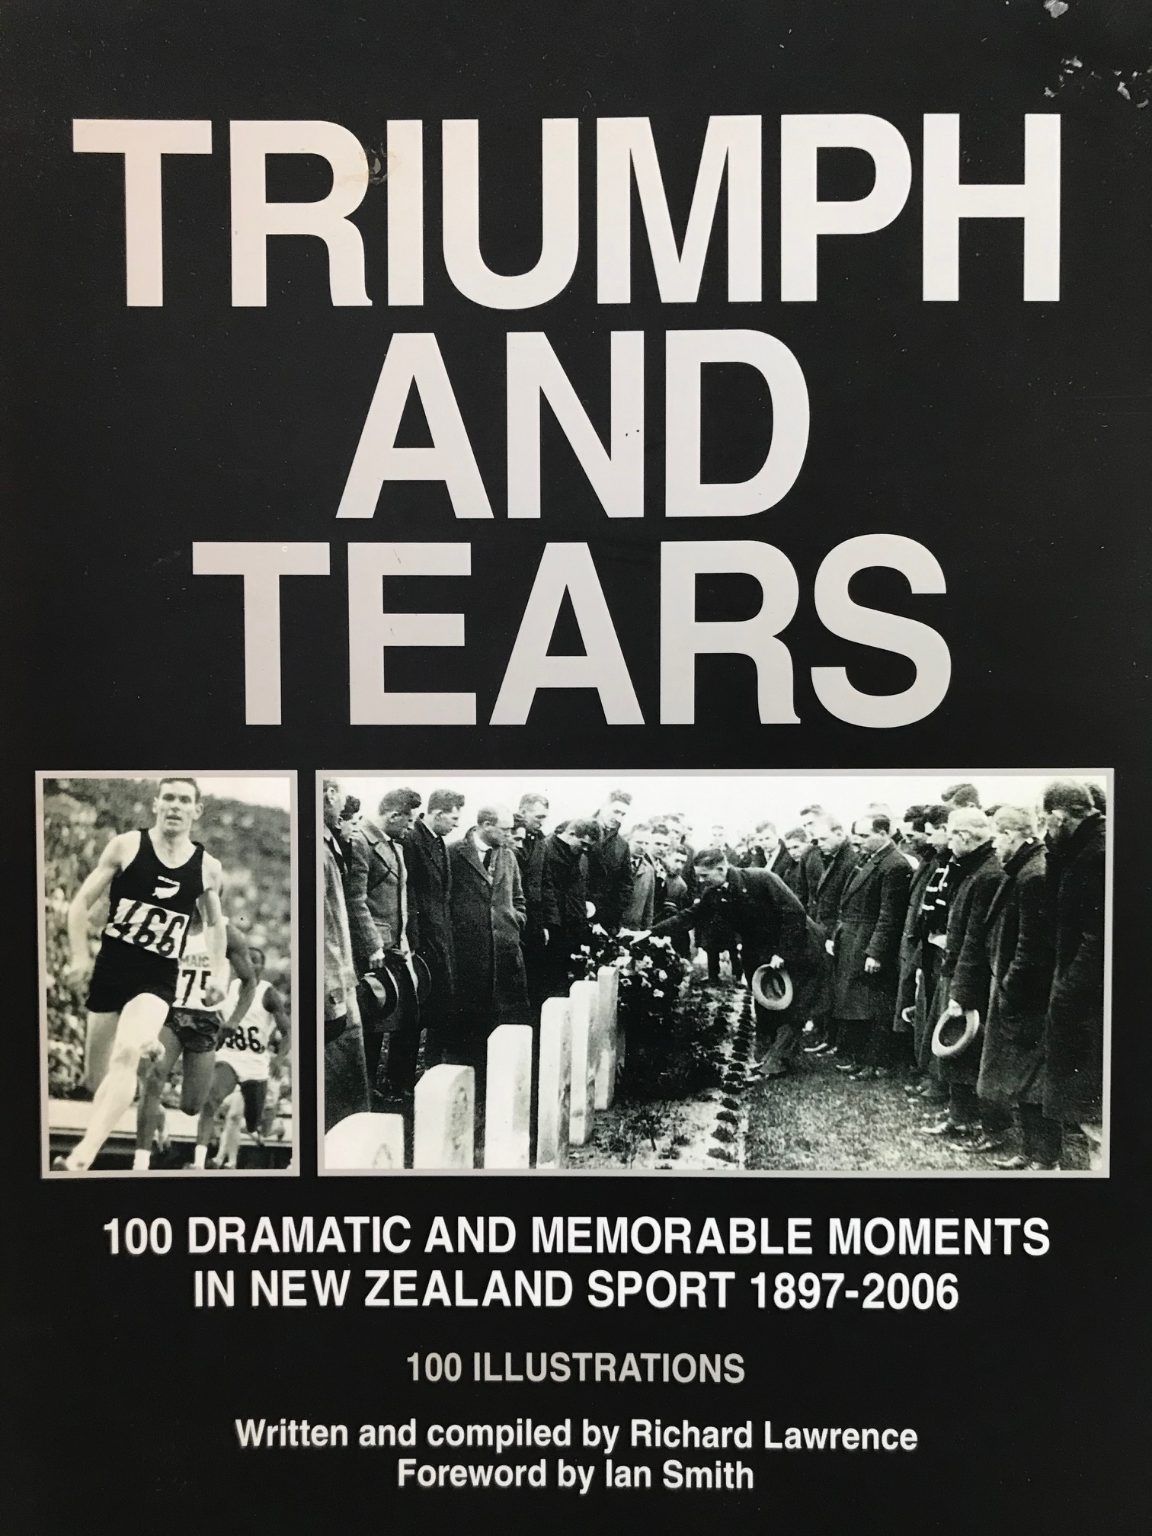 TRIUMPH AND TEARS: 100 Dramatic Moments In New Zealand Sport 1897-2006